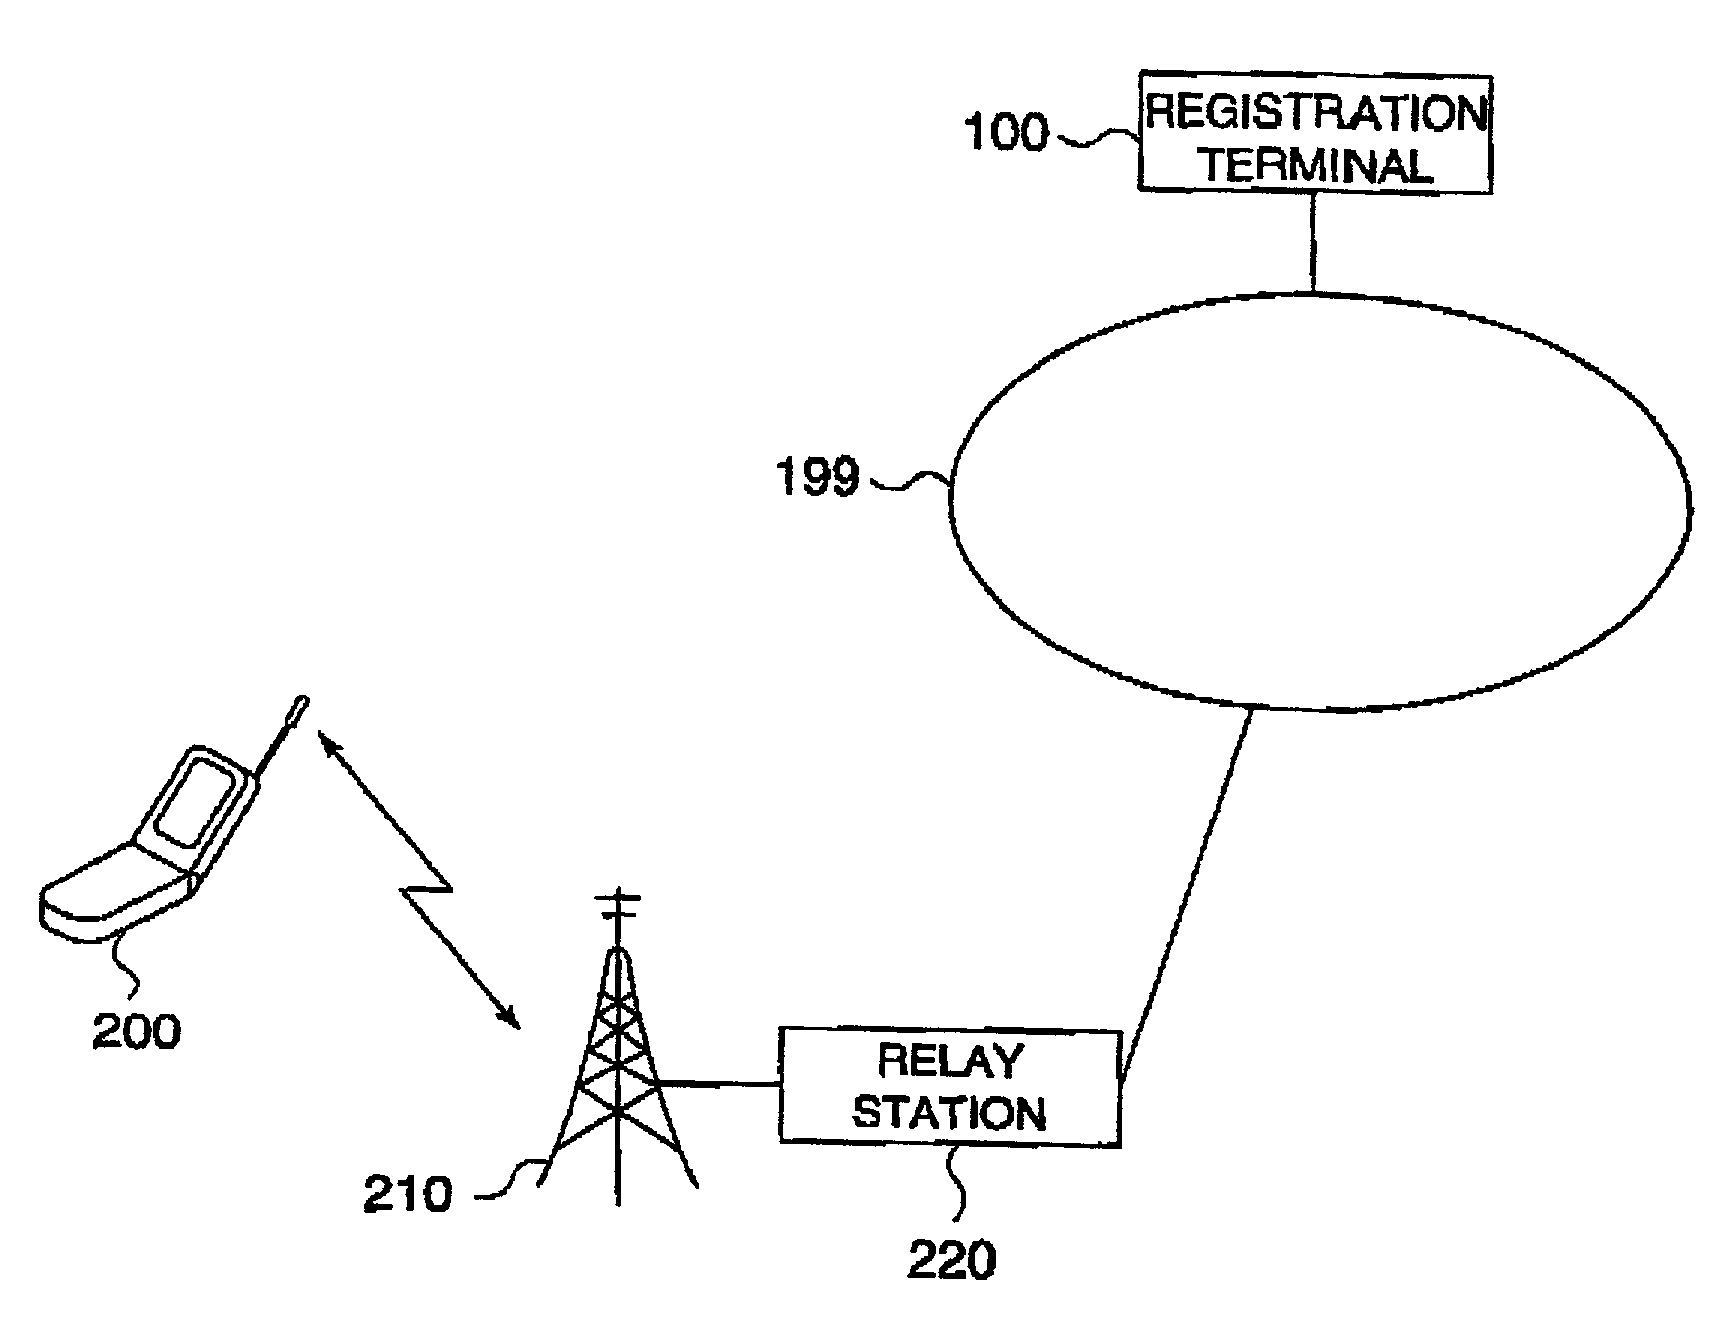 System and method for providing information to a portable terminal